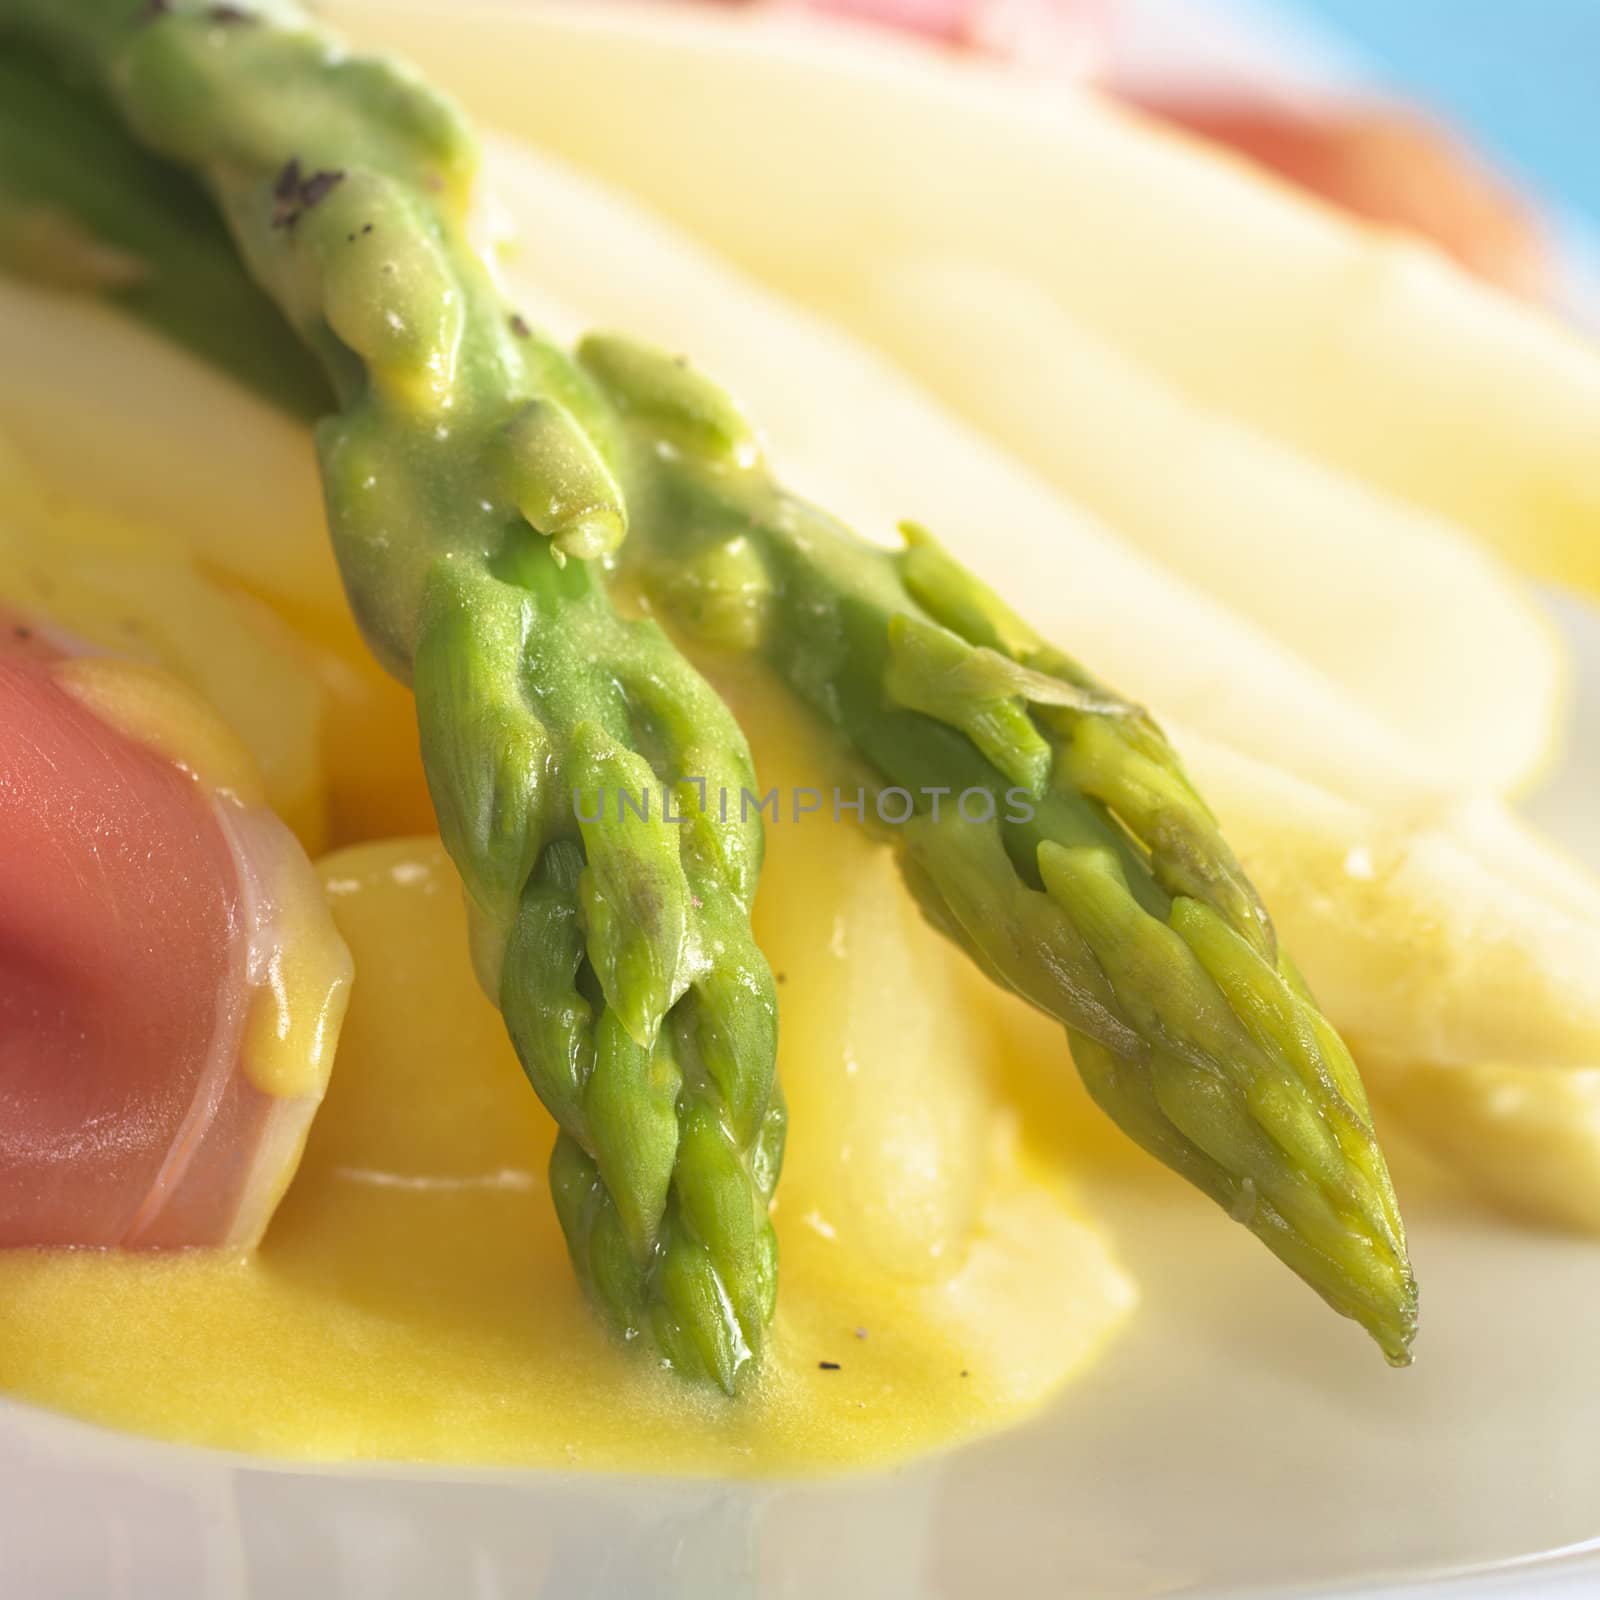 Green asparagus on cooked potato pieces with Hollandaise sauce on top and ham slices on the side (Selective Focus, Focus on the asparagus heads)